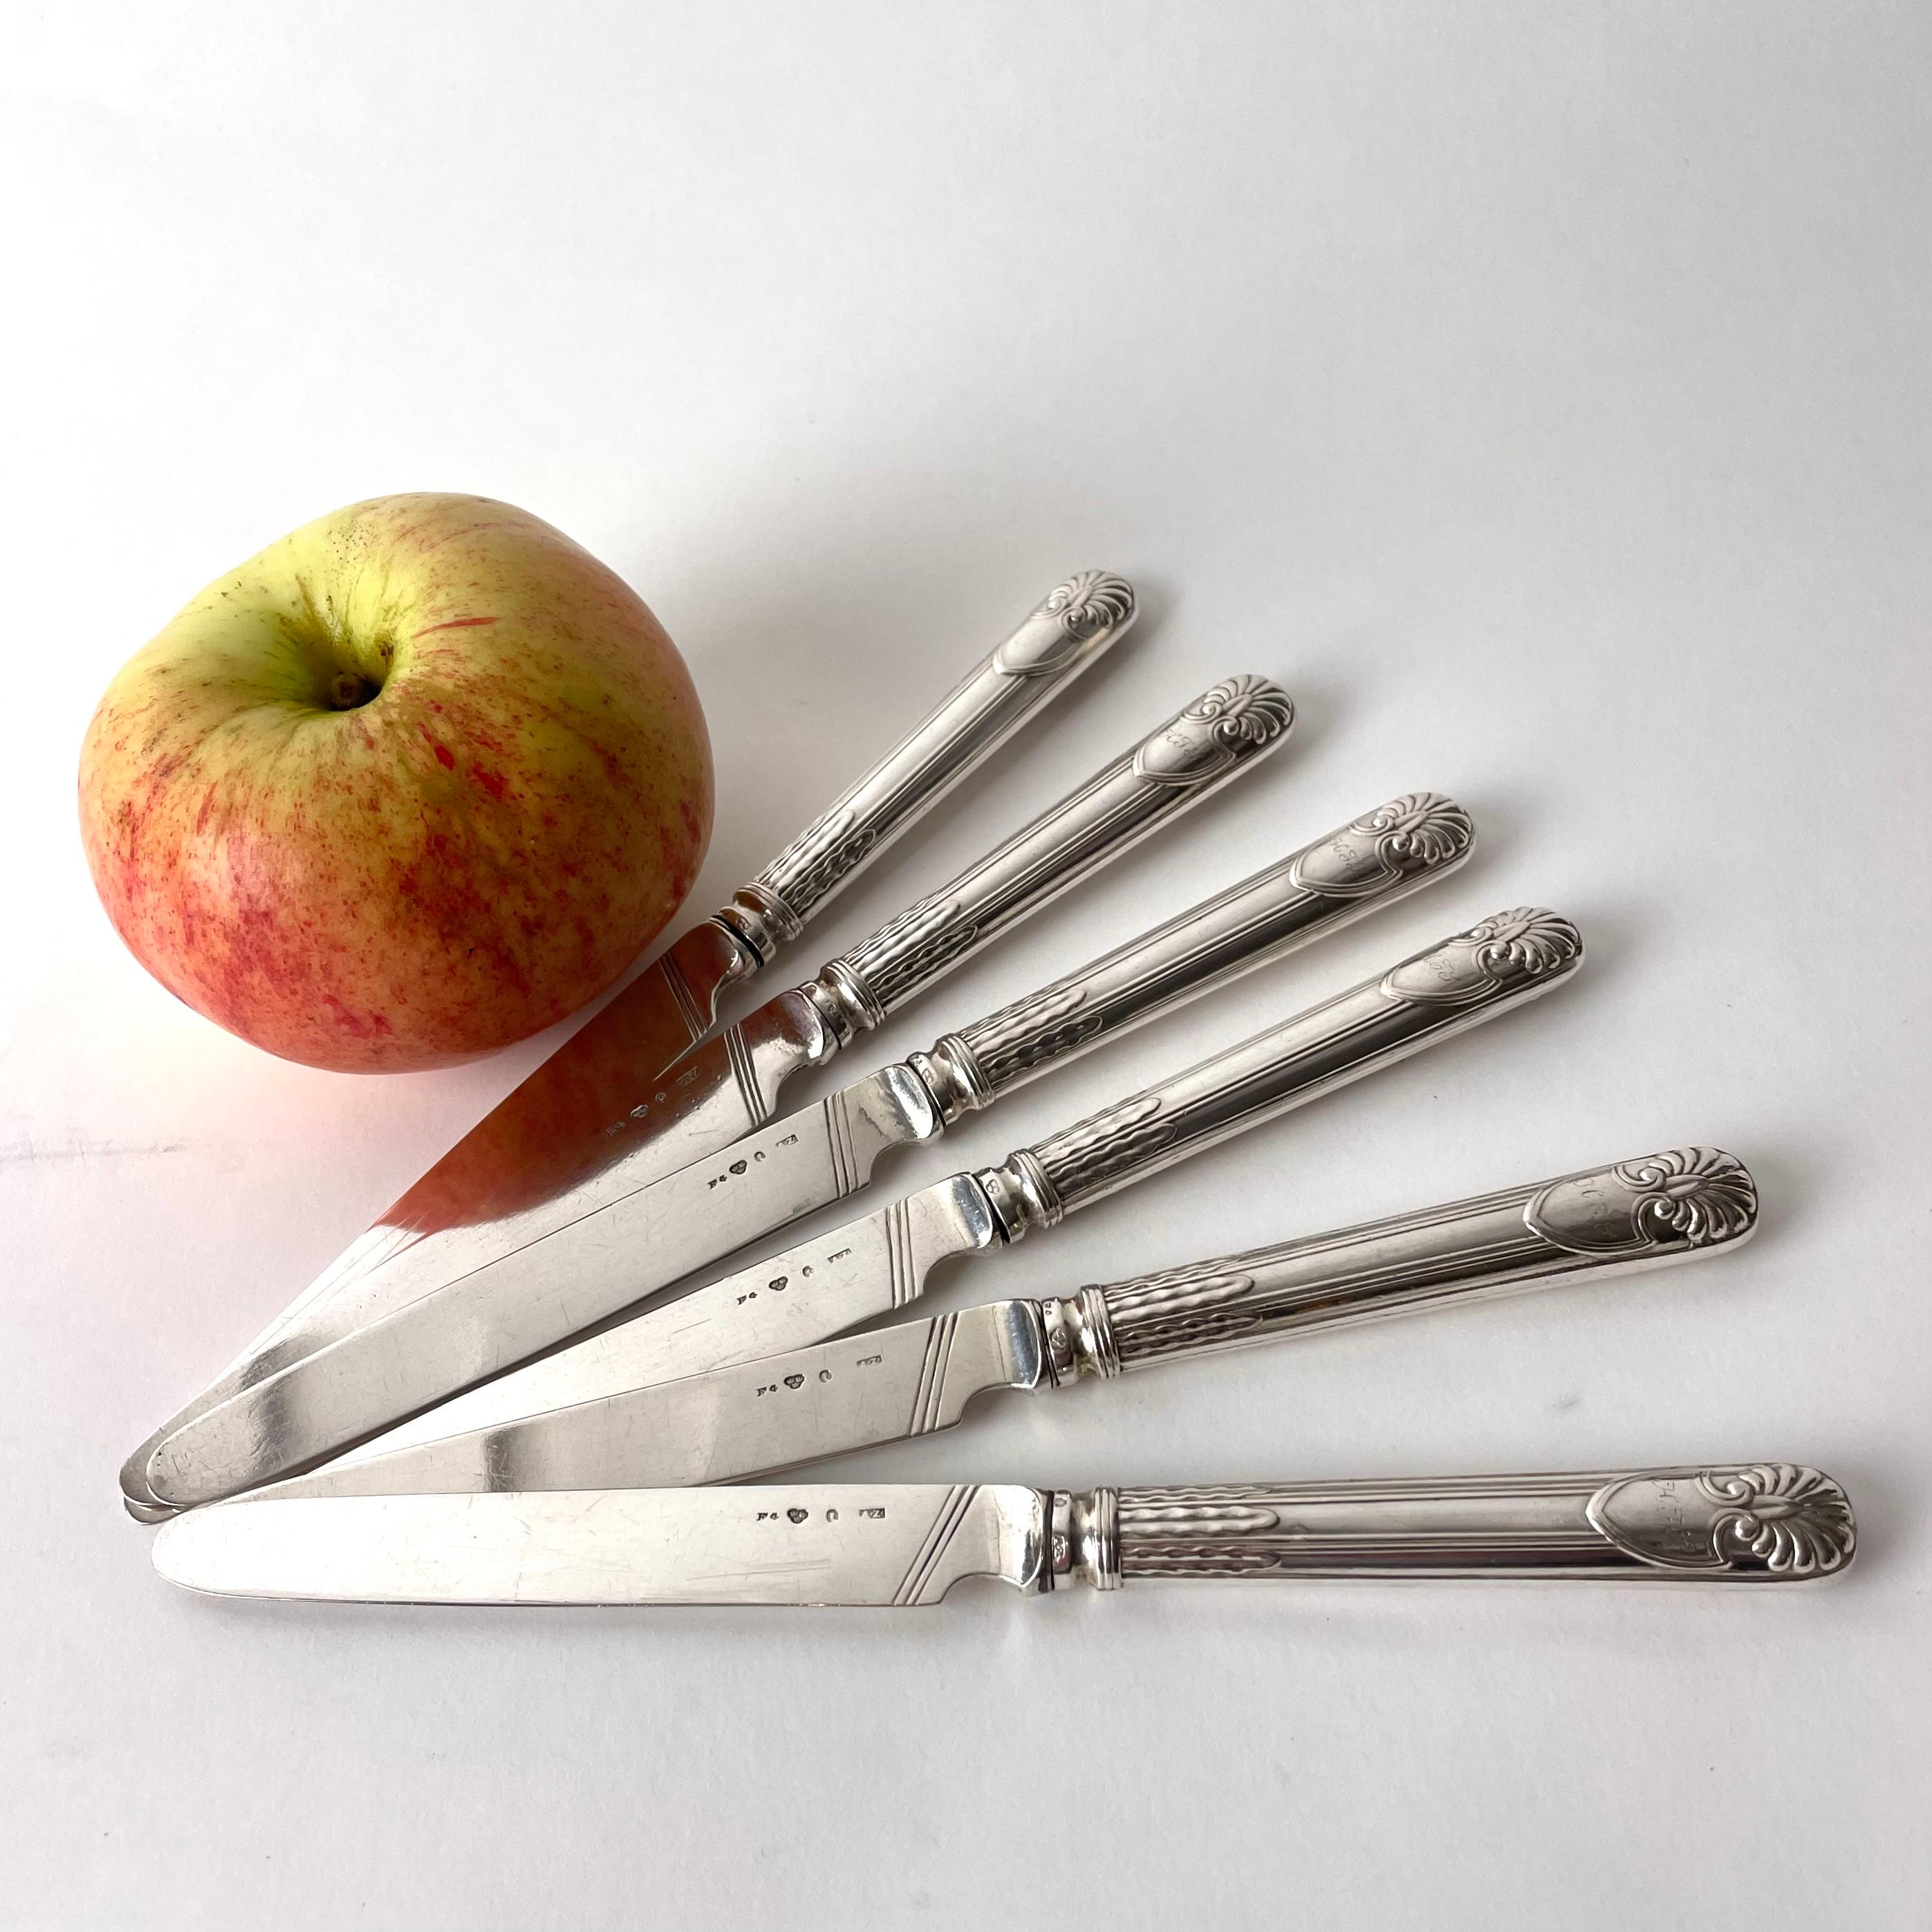 Six beautiful Fruit Knives in Silver by the famous silversmith Adolf Zethelius from Stockholm, Sweden. The knives are control stamped and marked F4 which means they were made in 1836.

Beautiful decor of shell, shield and leaf ornaments. One side of